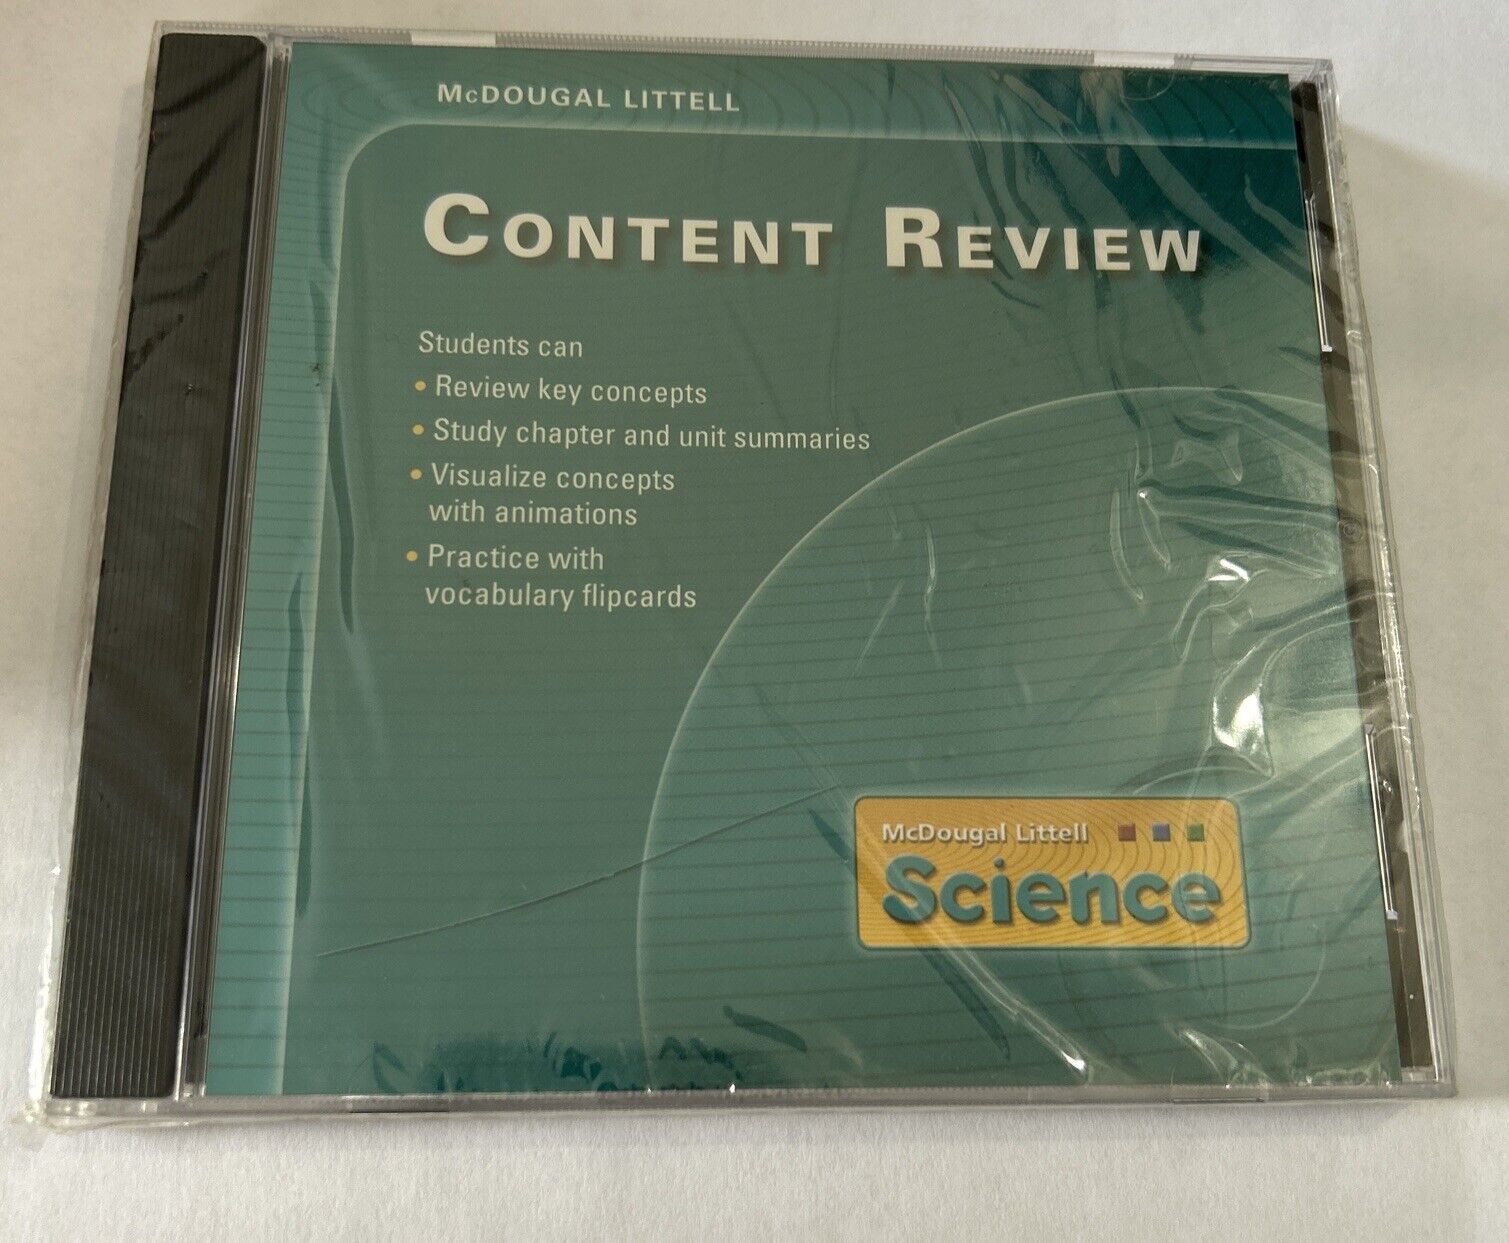 McDougal Littell Science Content Review CD ROM *New Sealed/Cracked Jewel Case